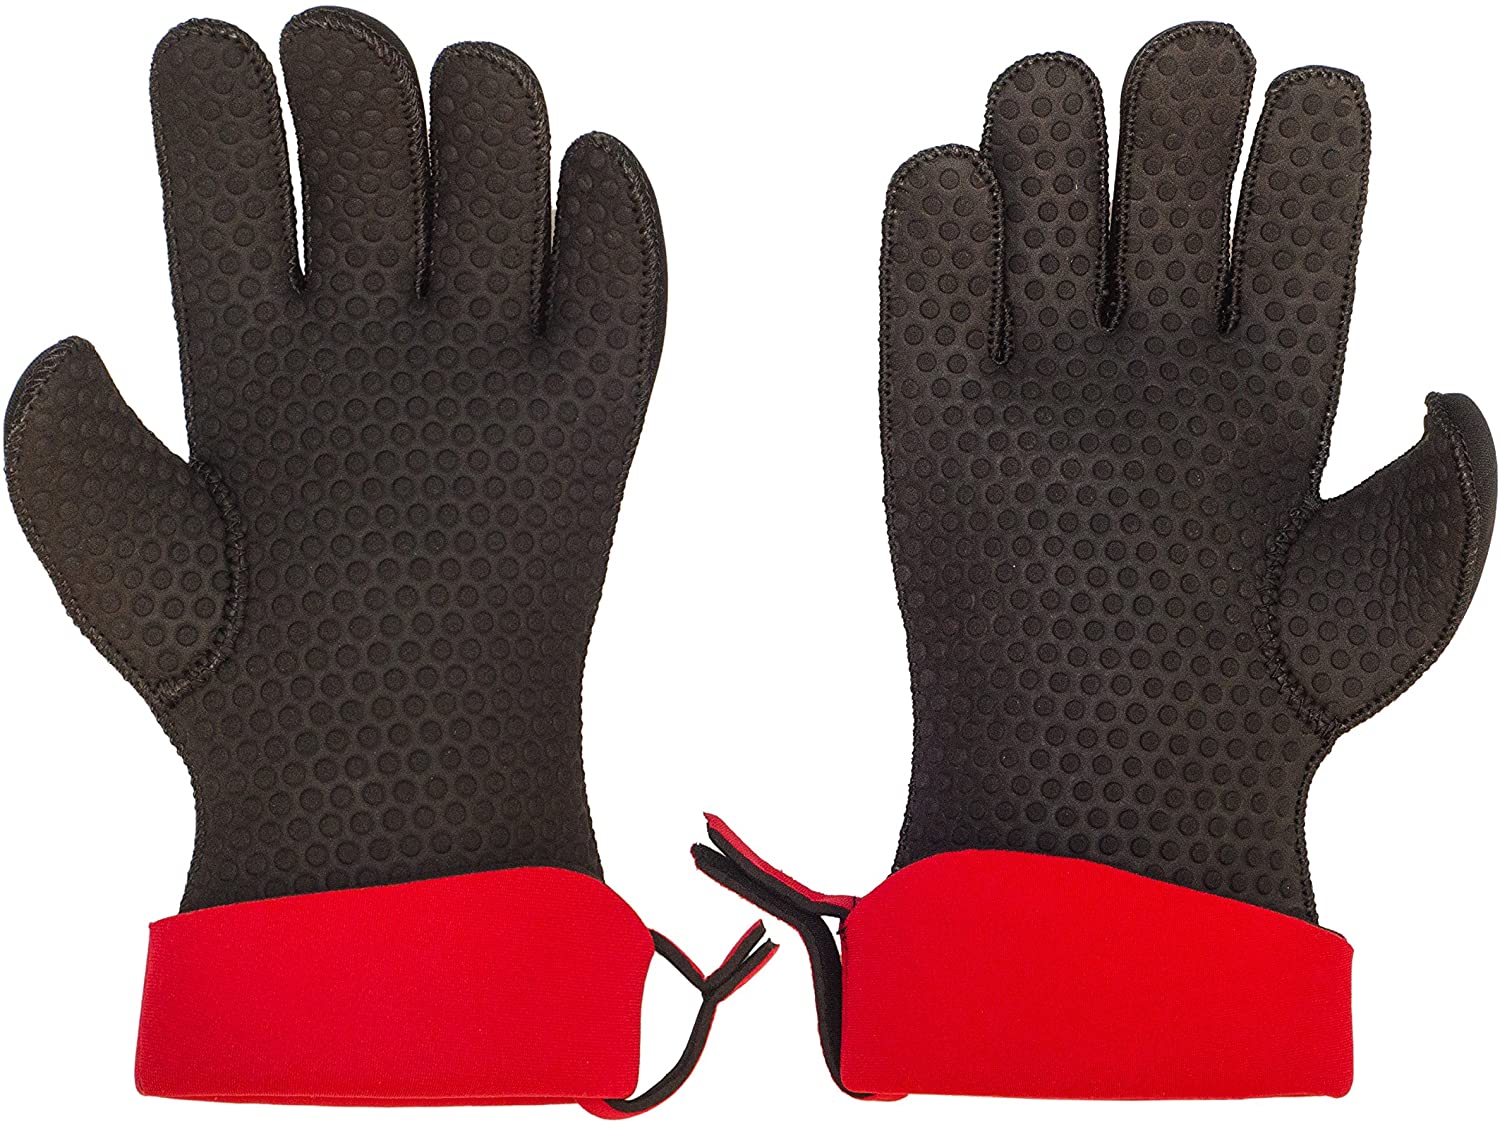 Pair of Cooking Gloves - size Small